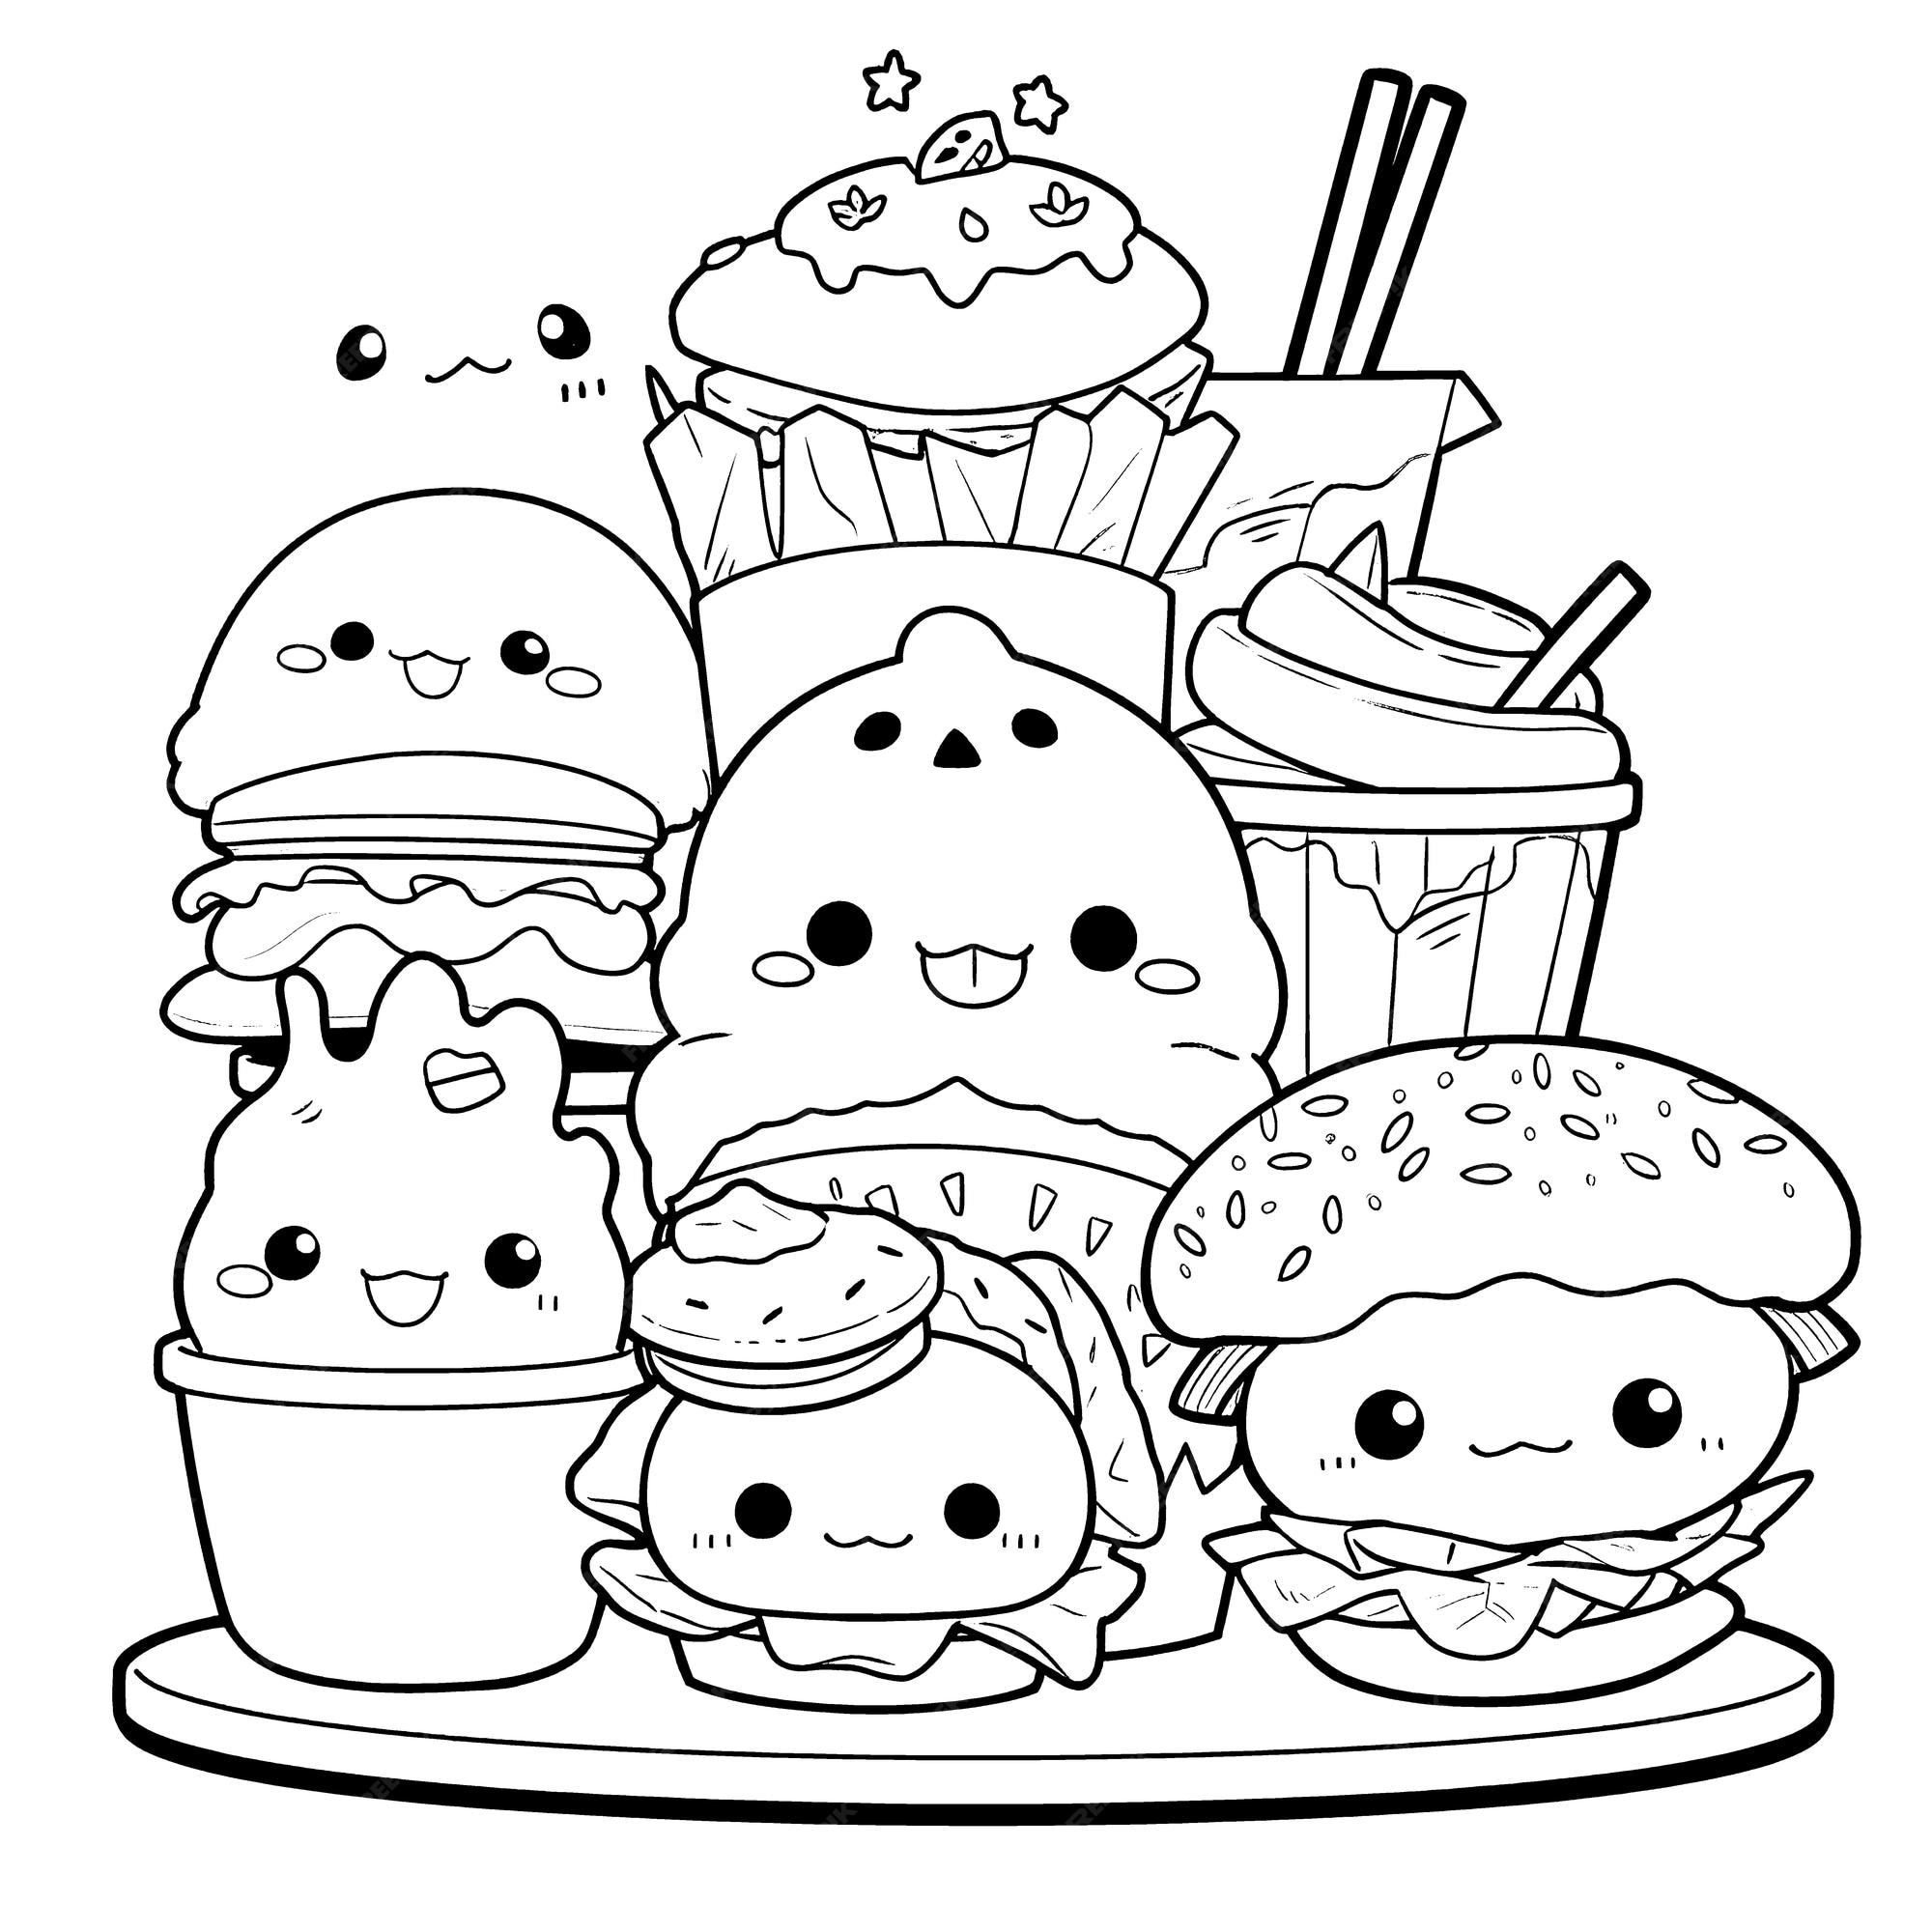 Premium vector cute fast food black and white coloring page for kids and adults line art simple cartoon style happy cute and funny